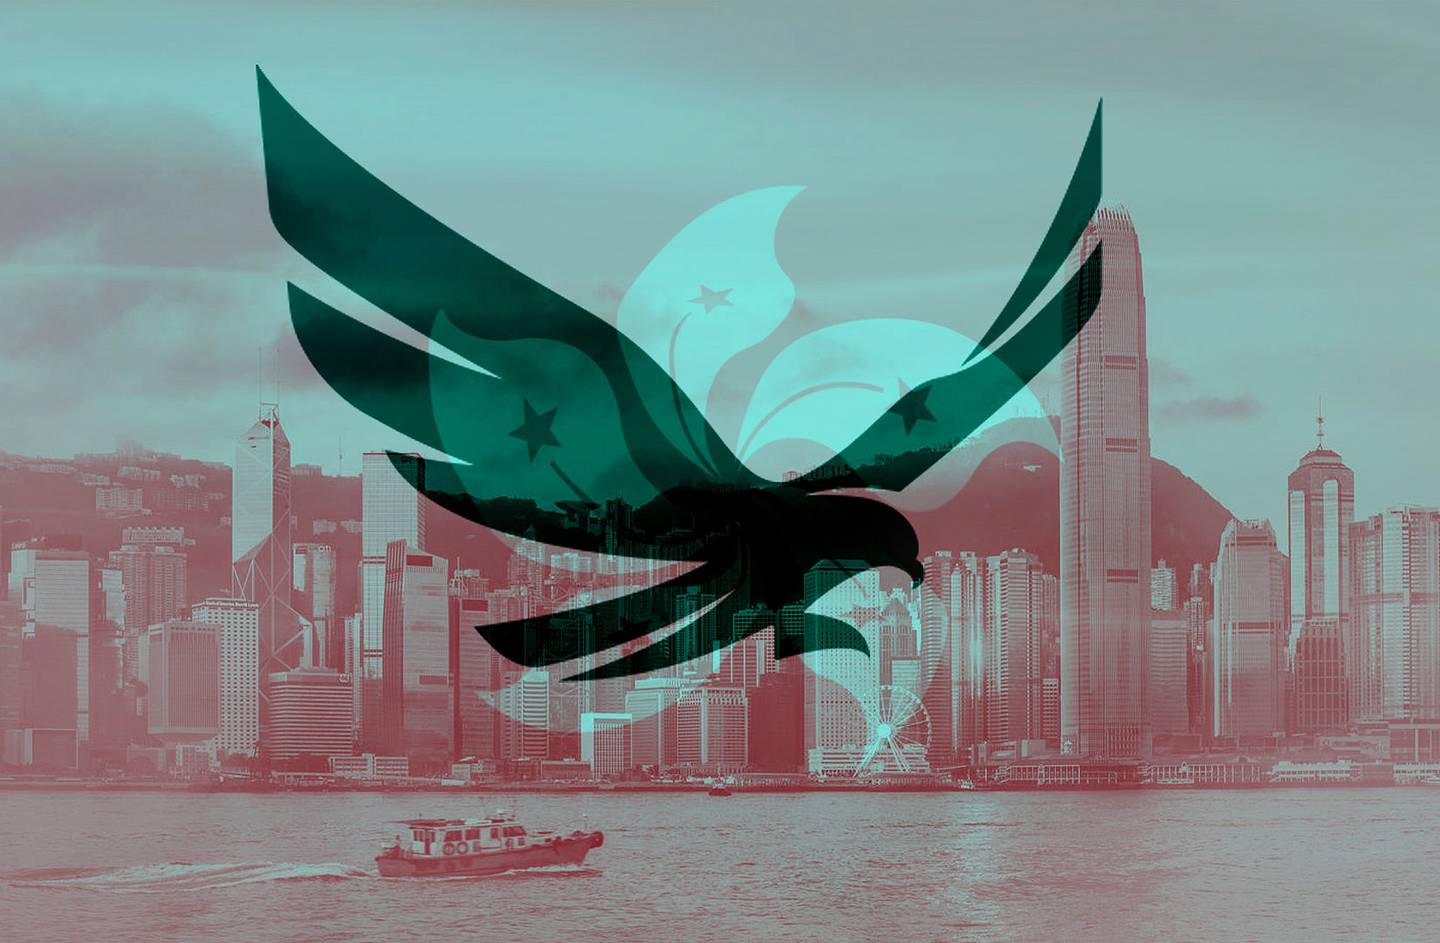 Flag of Hong Kong superimposed onto the Hong Kong Harbour, with the logo of the Securities and Futures Commission.